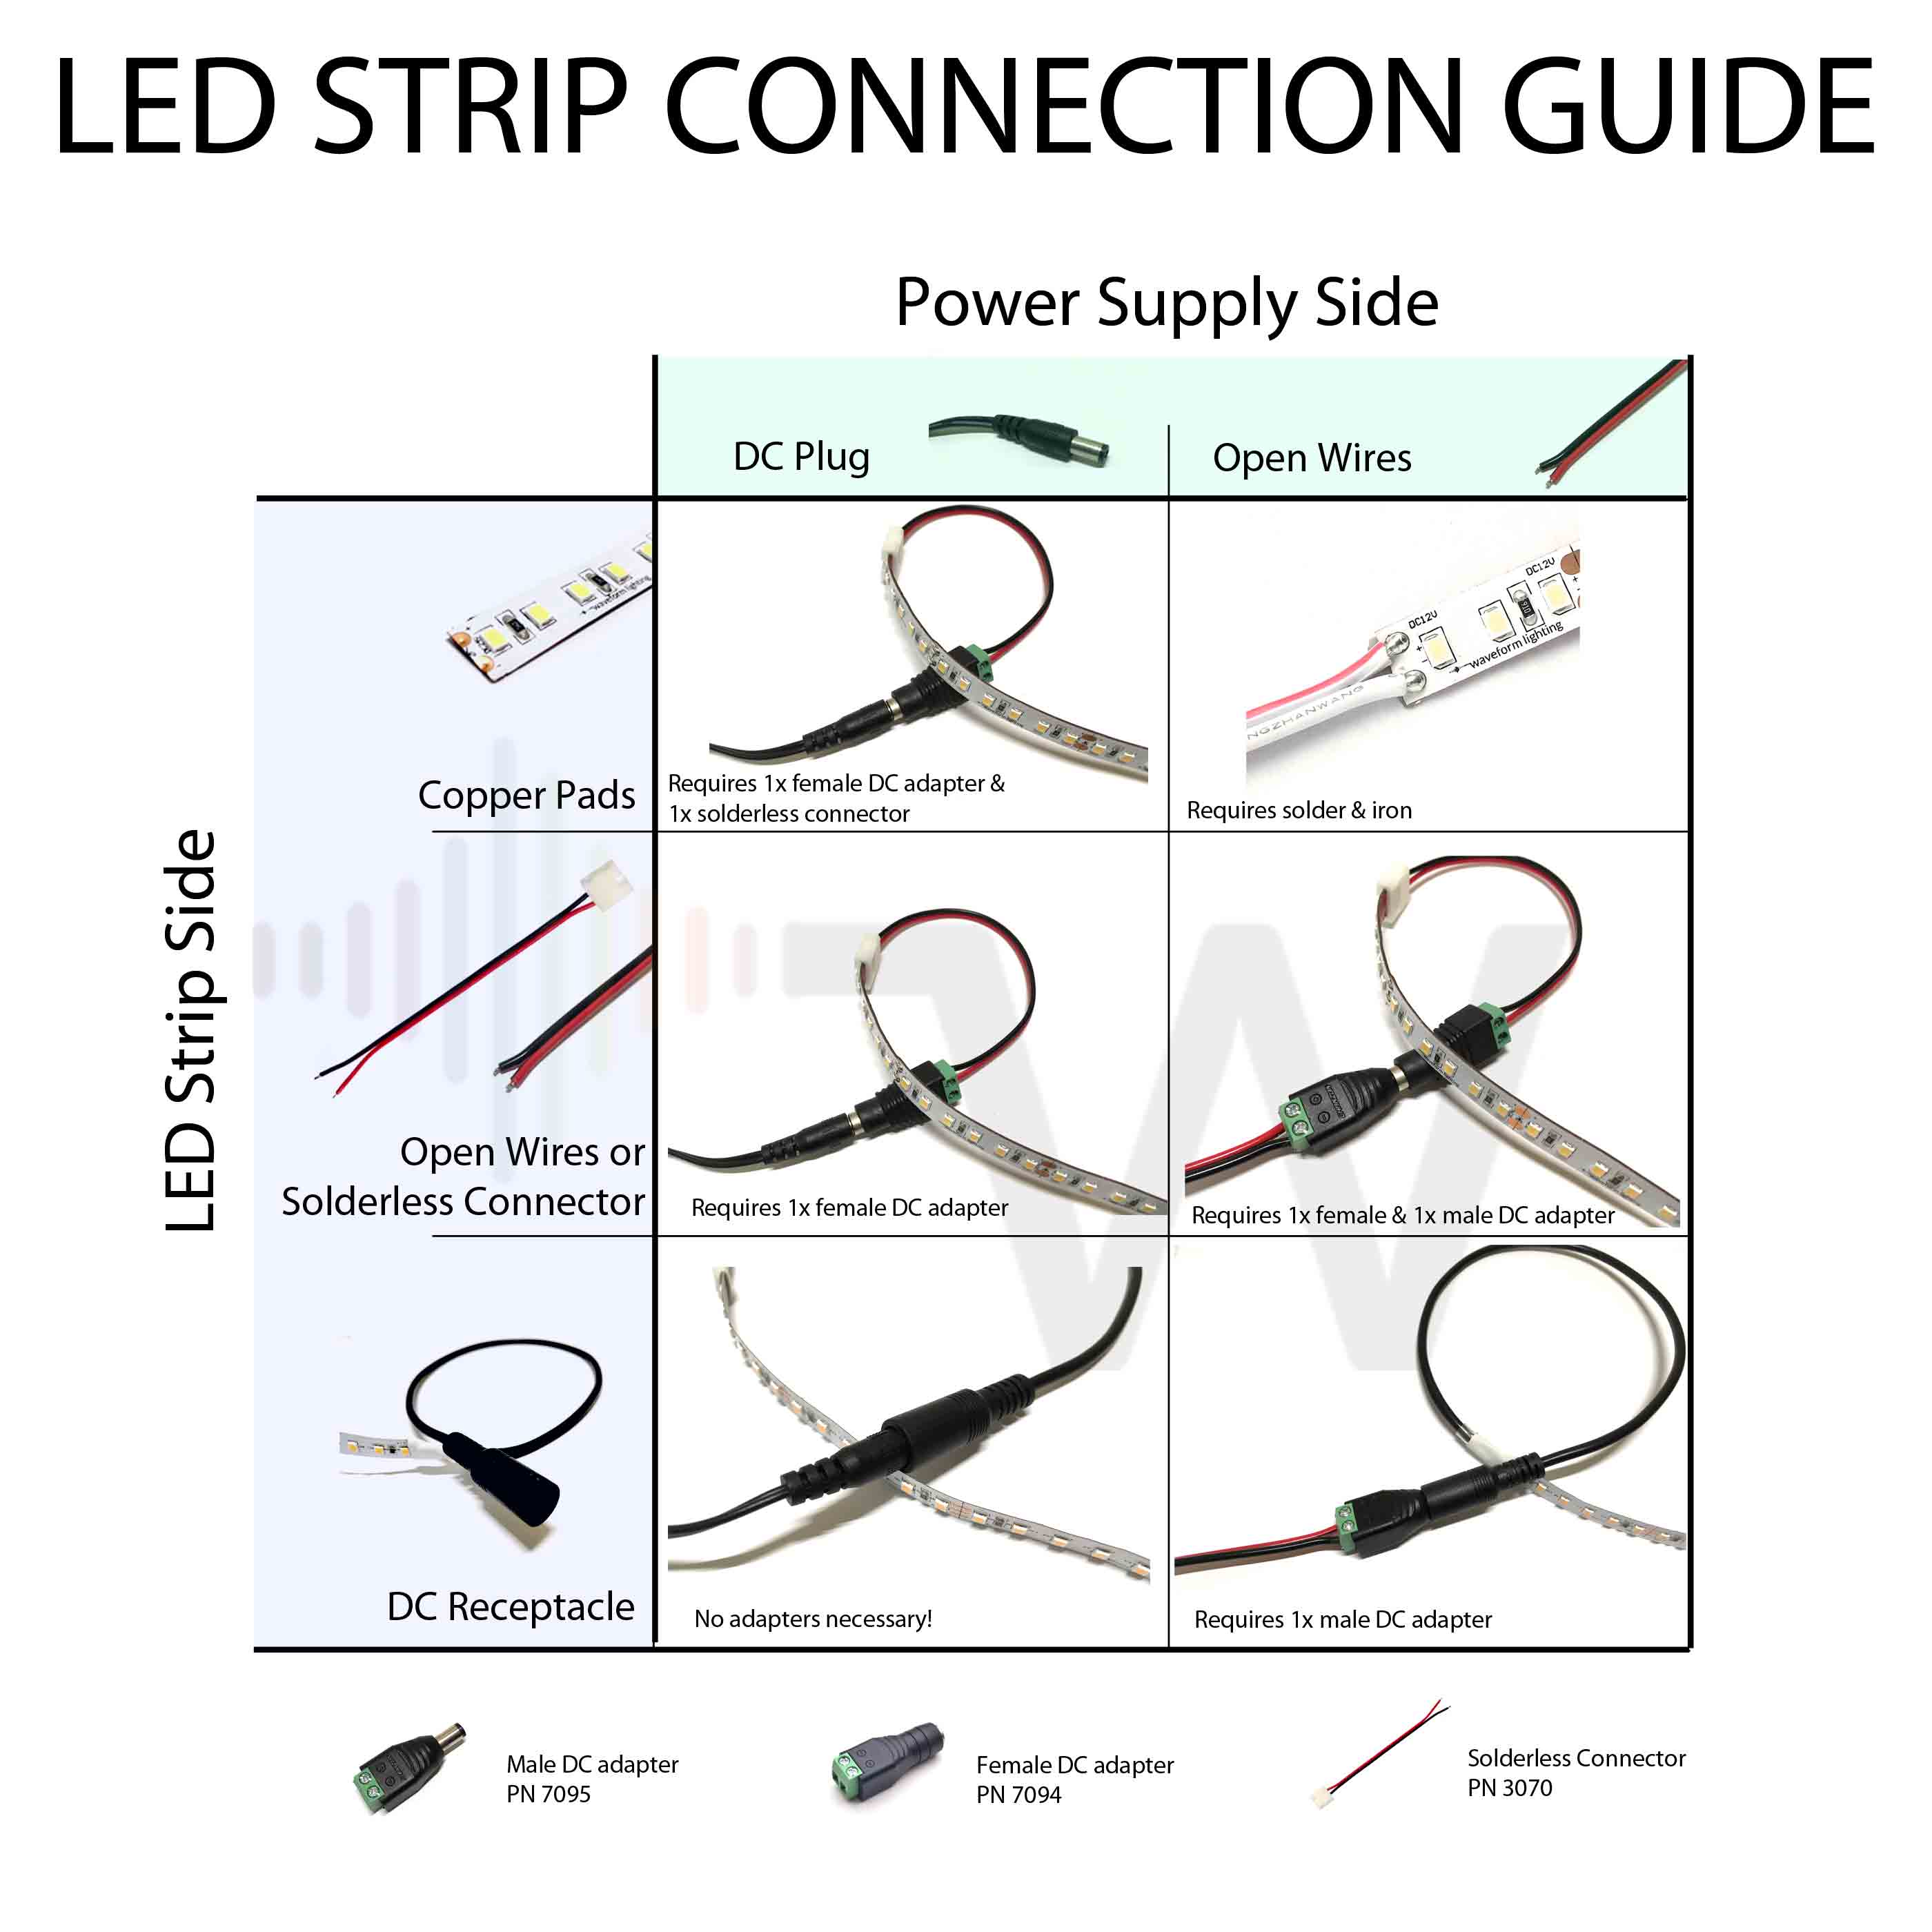 How to Connect An LED Strip to a Power Supply | Waveform Lighting